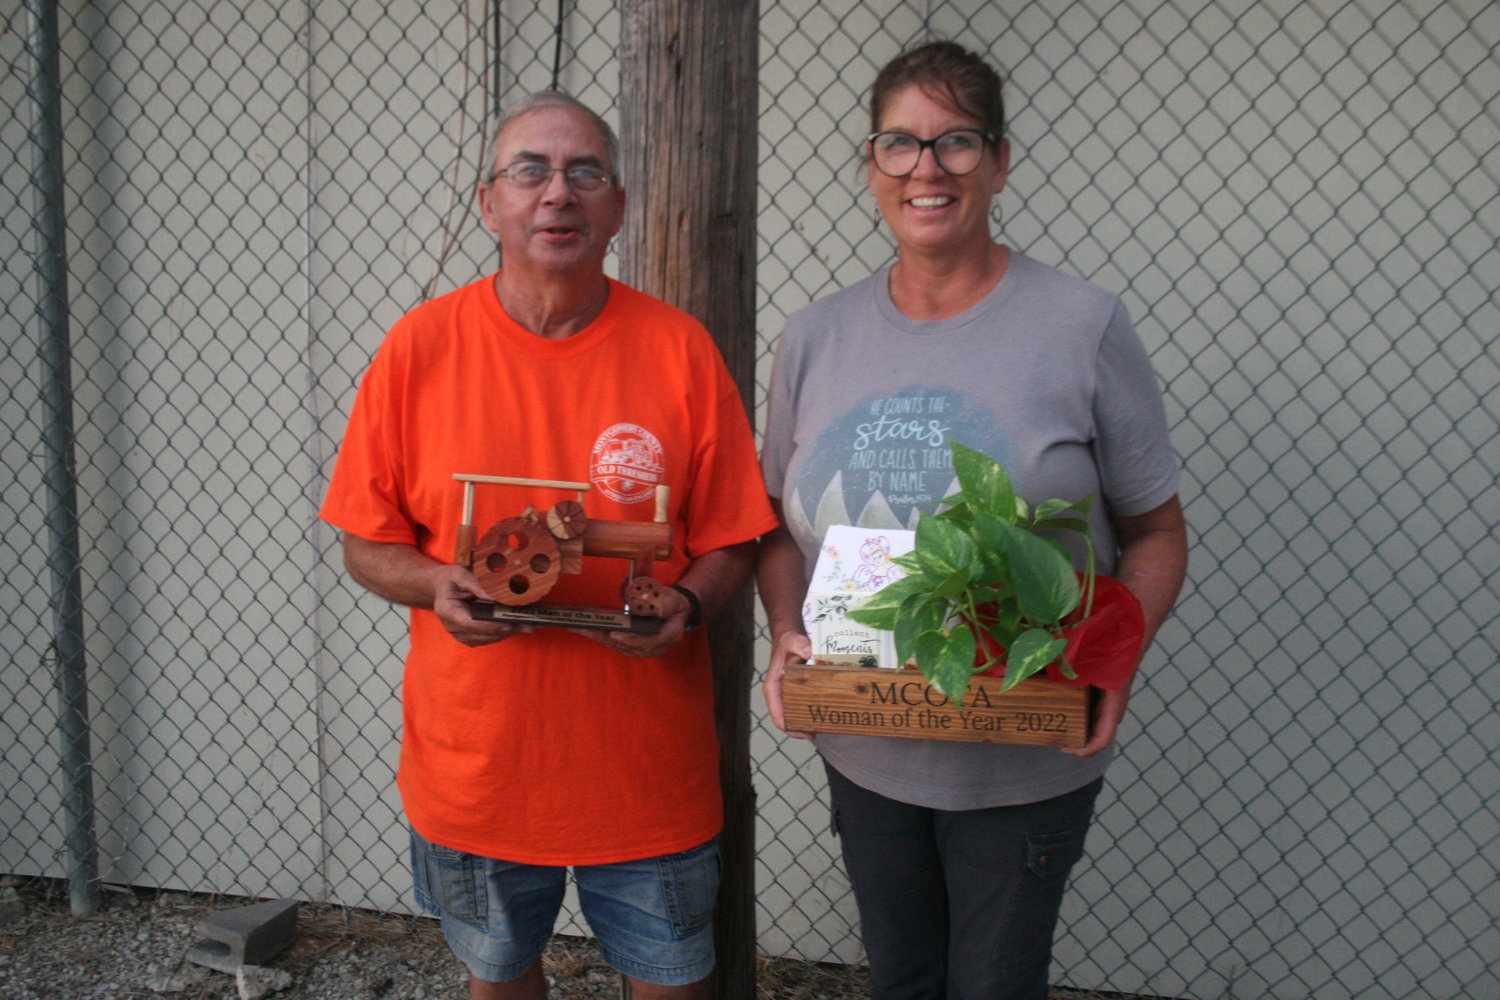 Victor Wiser and Julie Bote pose with their Old Threshers Man and Woman of the Year awards on Aug. 20 at the Montgomery County Fairgrounds.